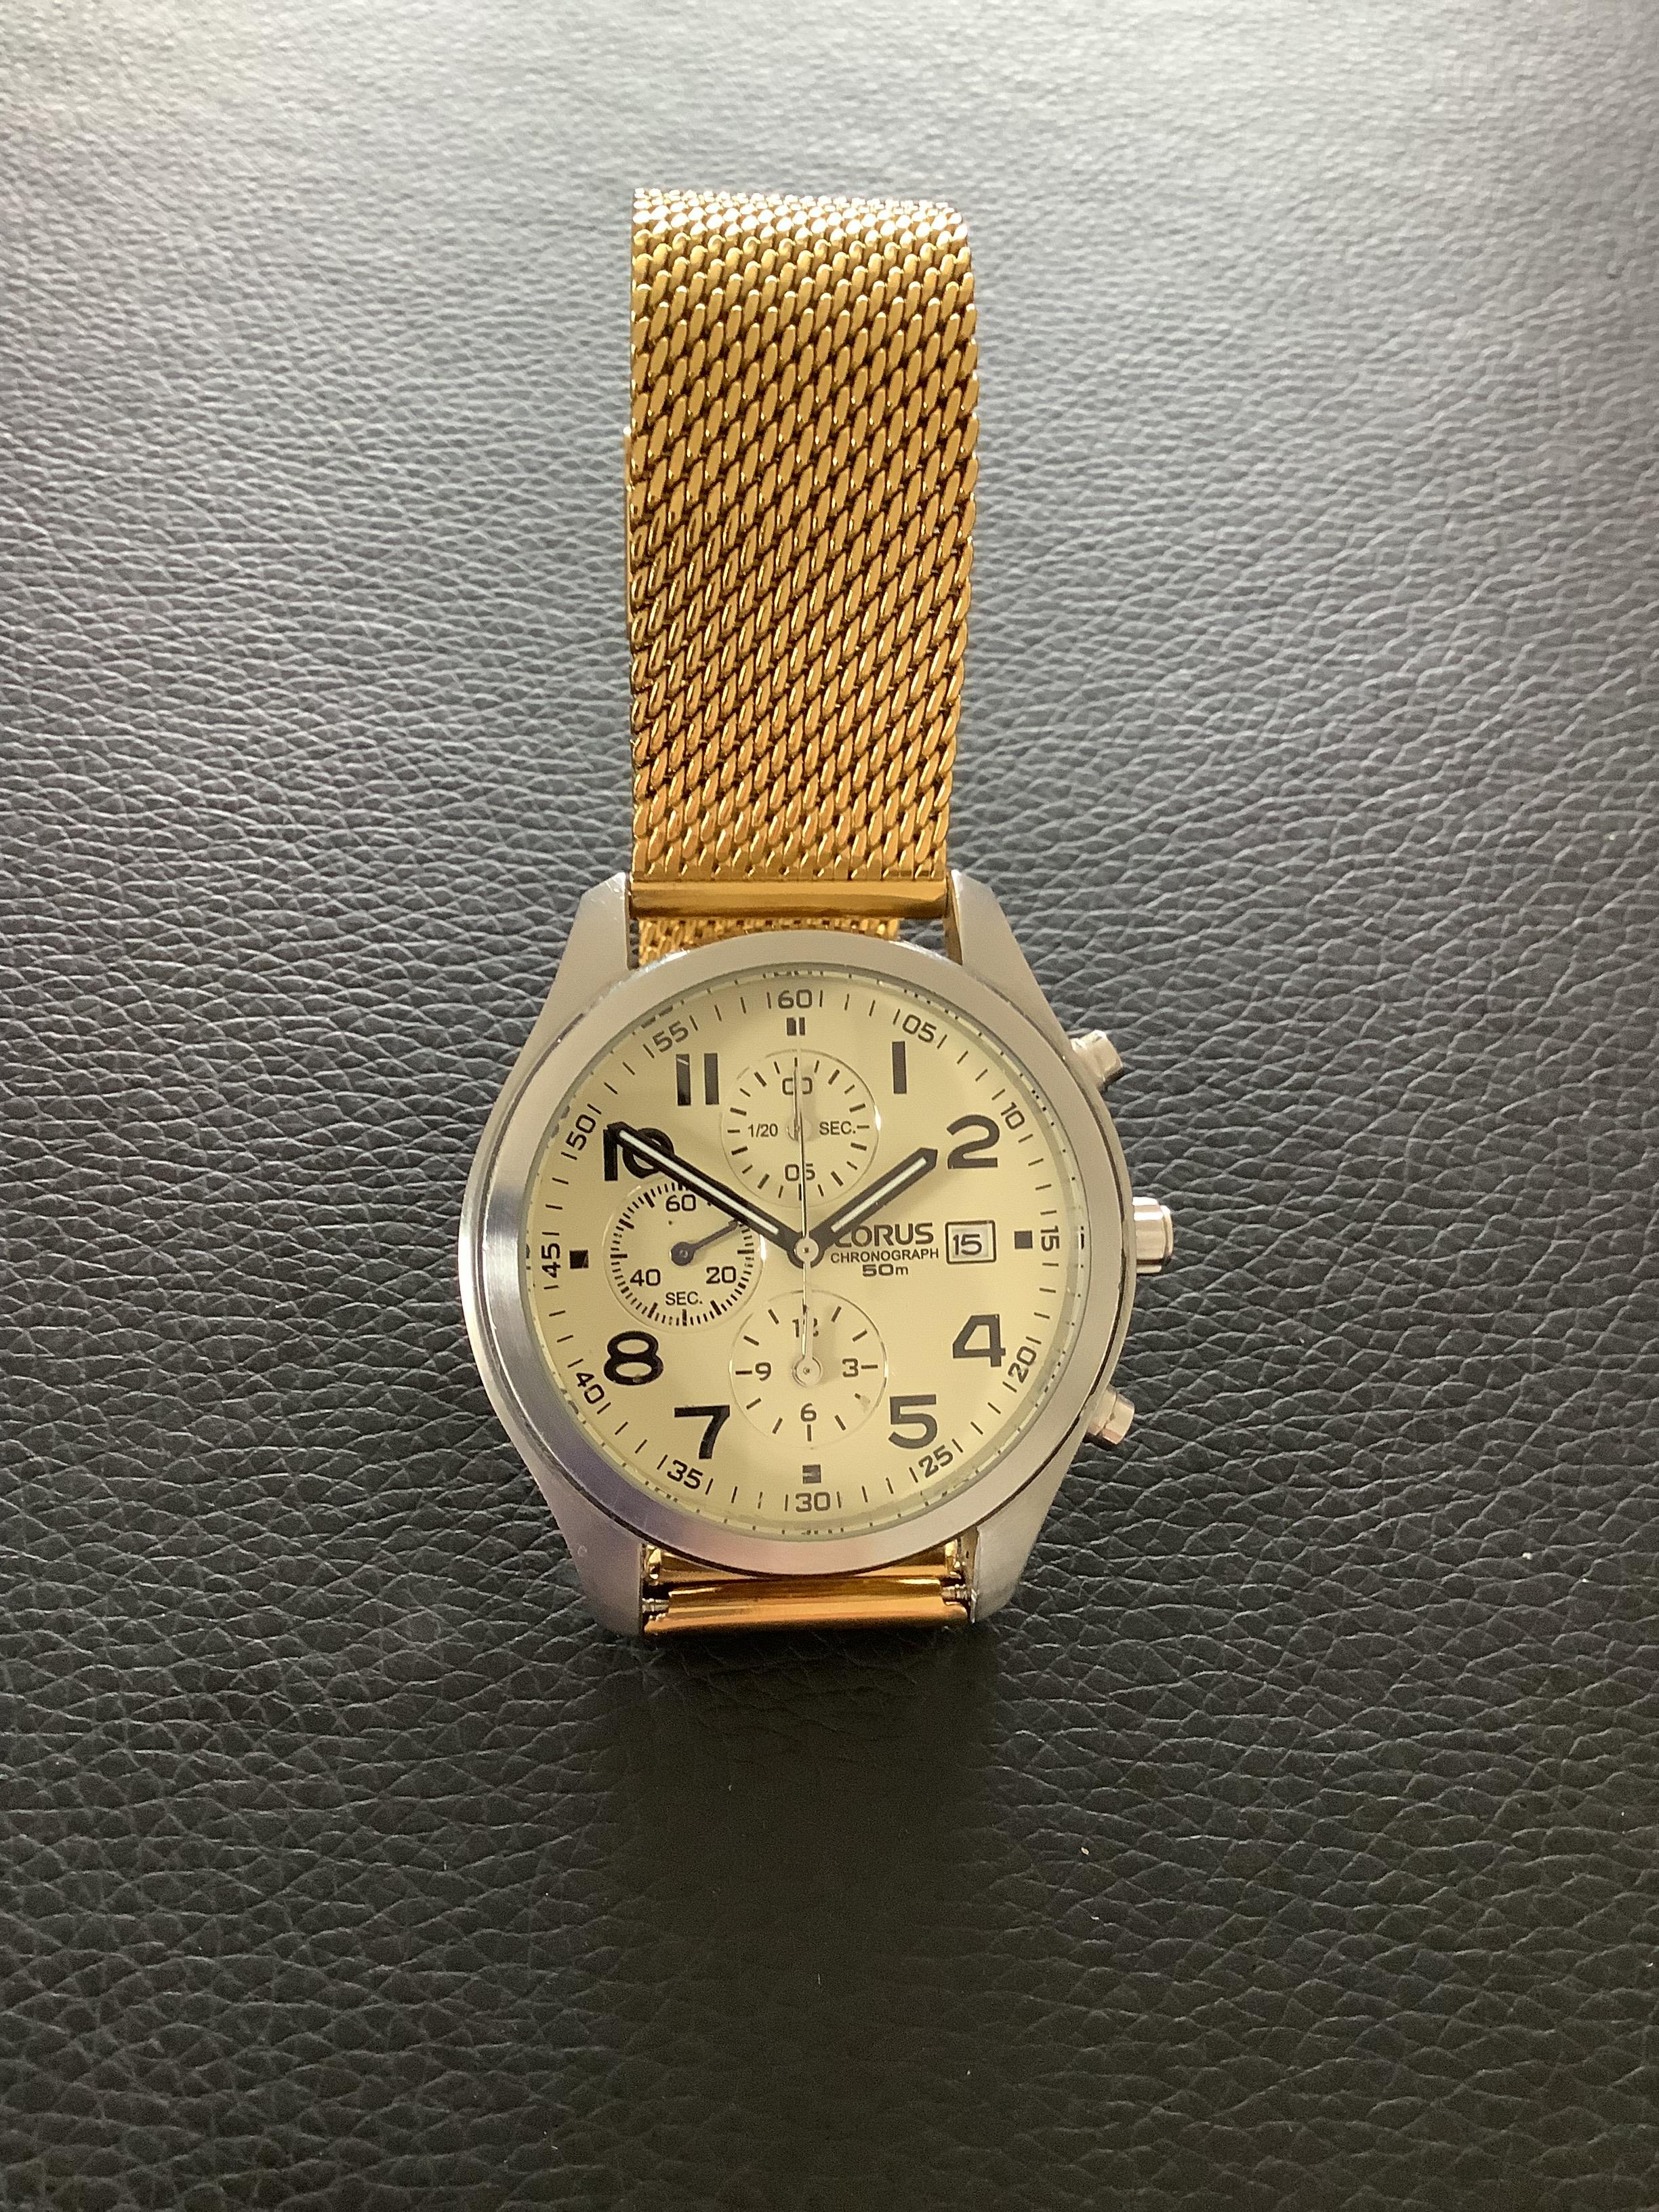 Smart & Elegant Lorus Gold Plated Chronograph Wristwatch (GS 183) Here is a really Smart &